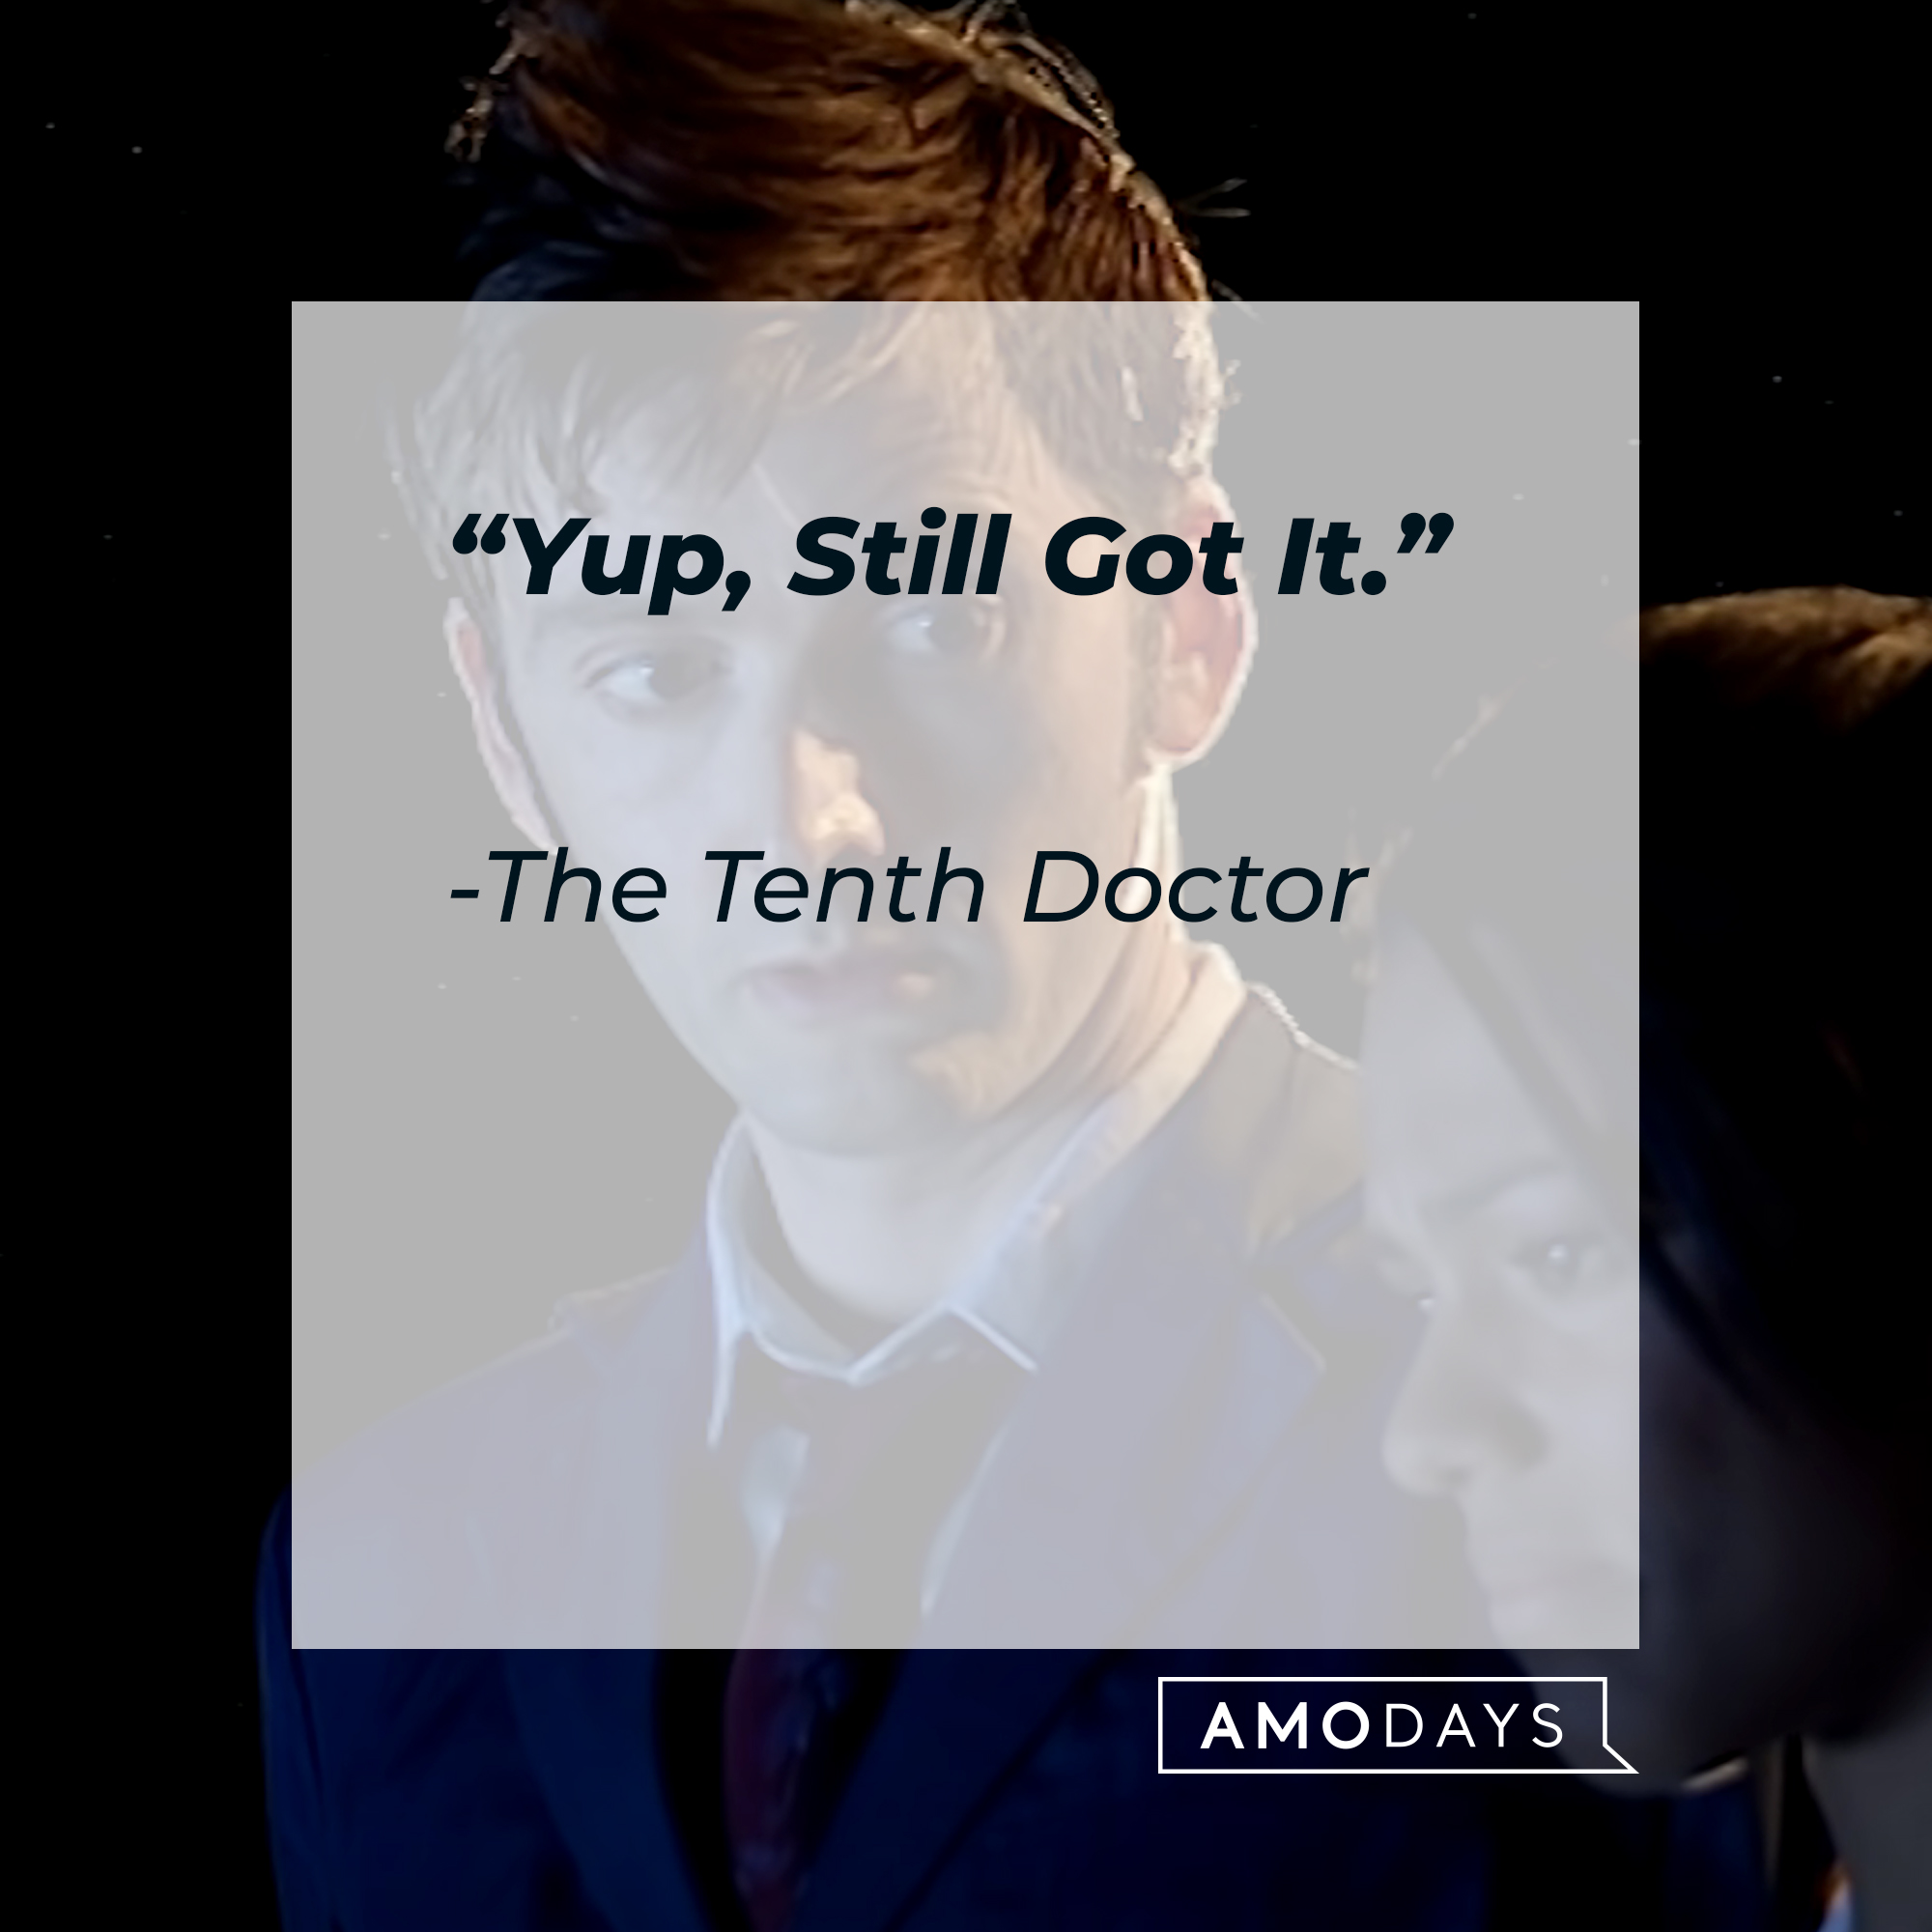 The Tenth Doctor's quote: "Yup, Still Got It." | Source: youtube.com/DoctorWho